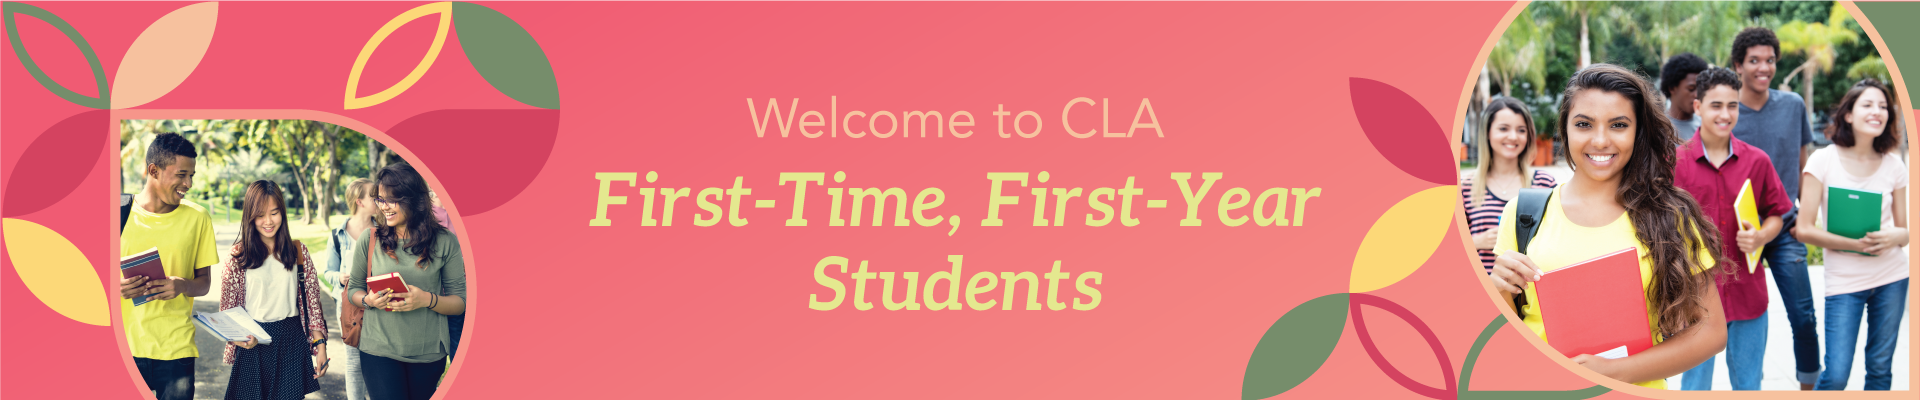 Welcome to CLA First-Time, First-Year Students